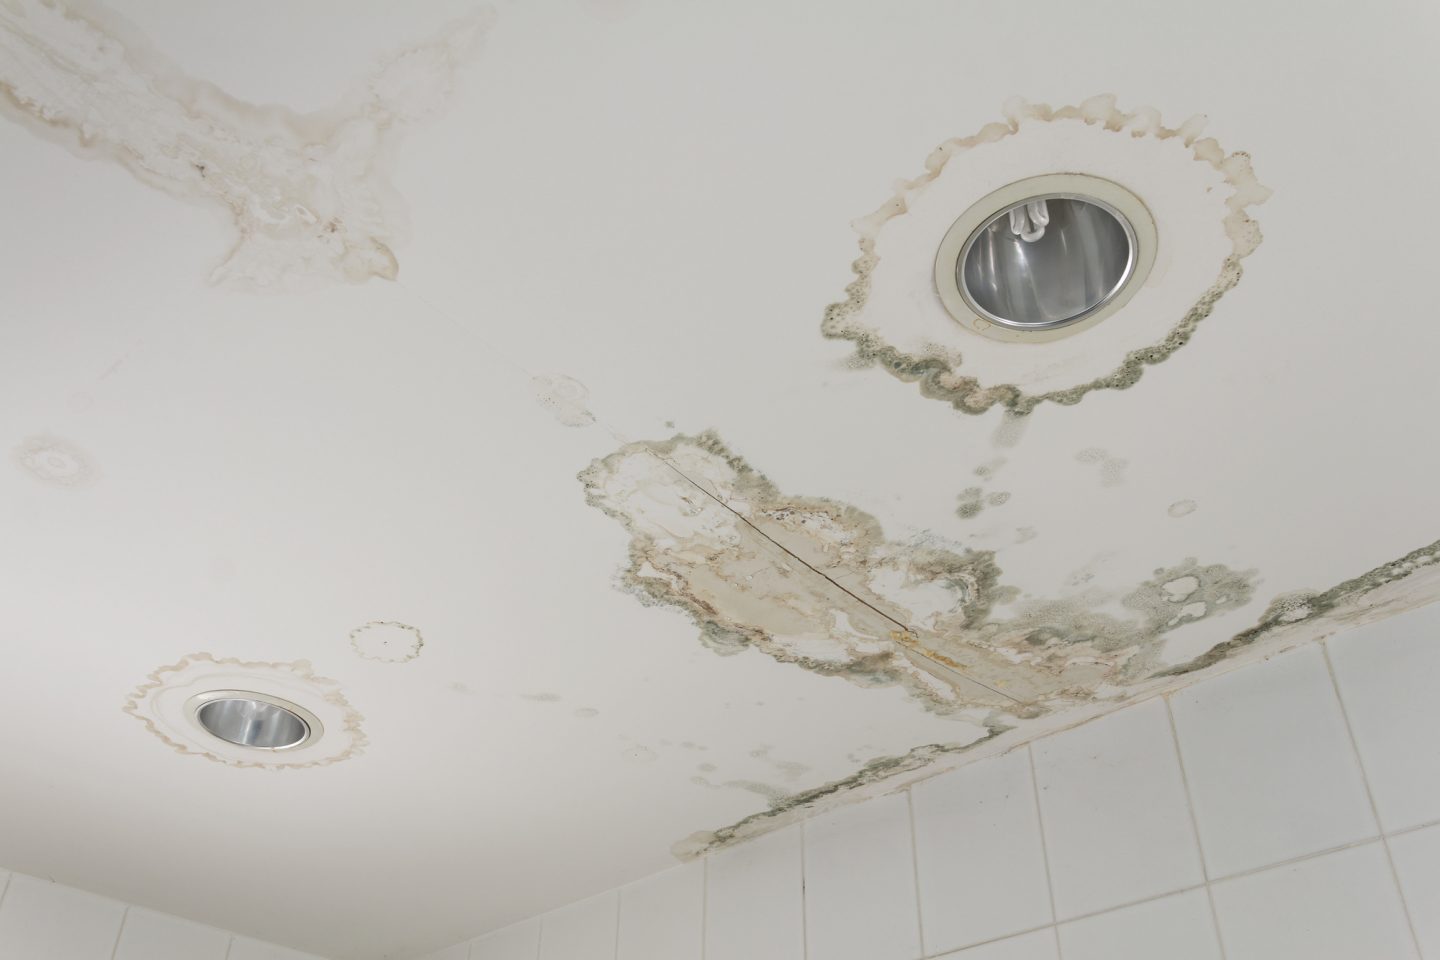 The 3 Different Types of Water Damage: How to Identify, Fix, and Prevent Further Damage